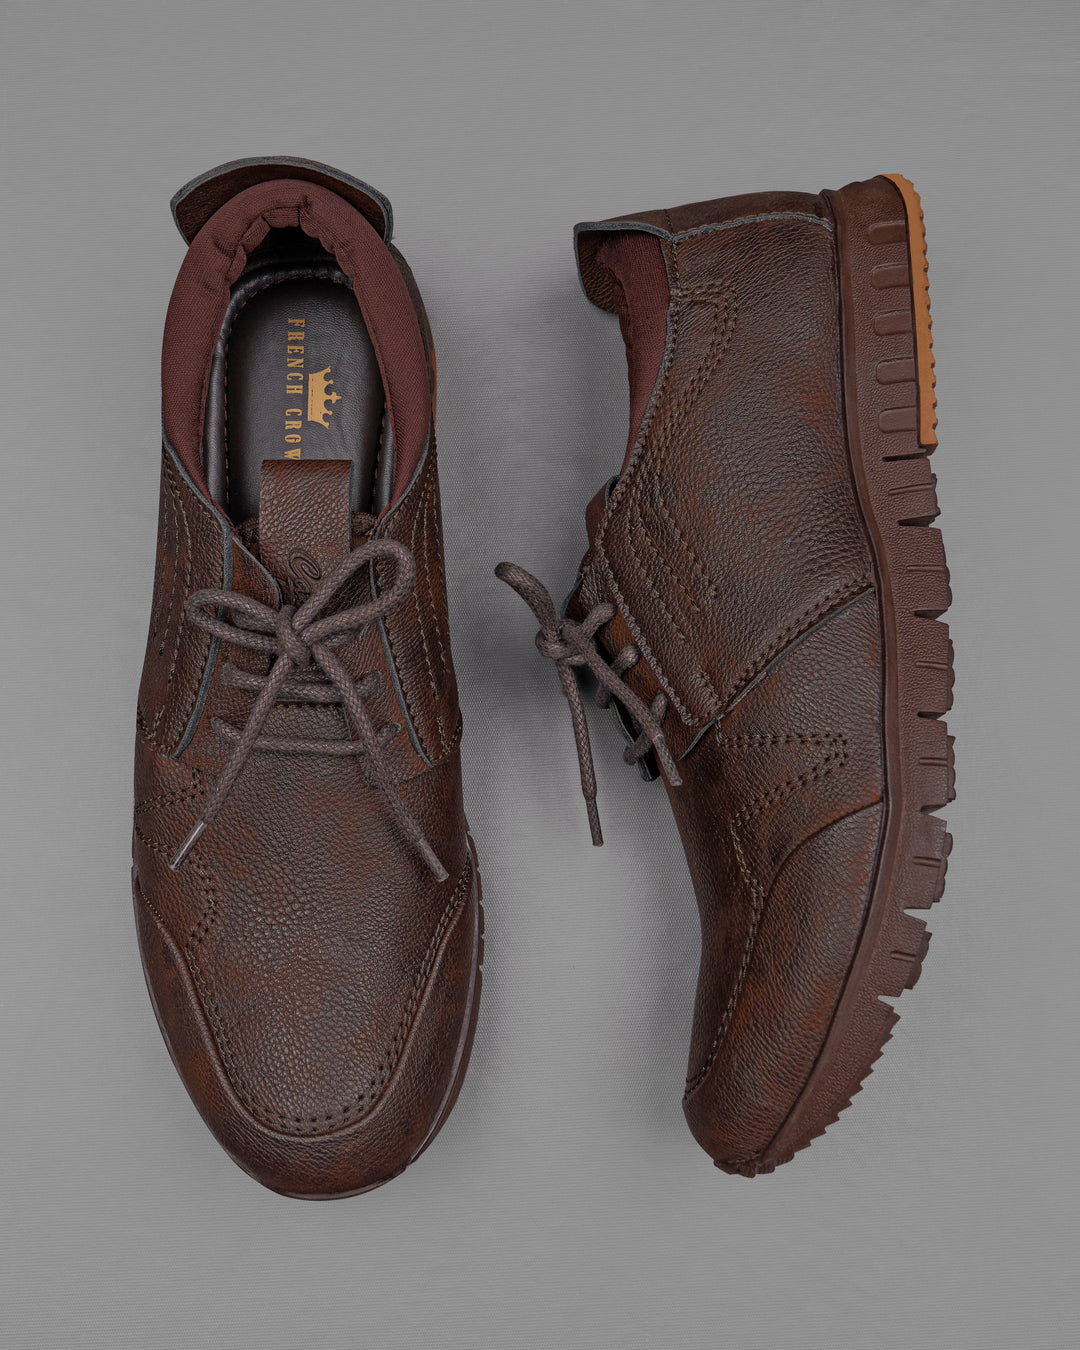 10 Types Of Shoes Every Man Should Try With Different Outfits